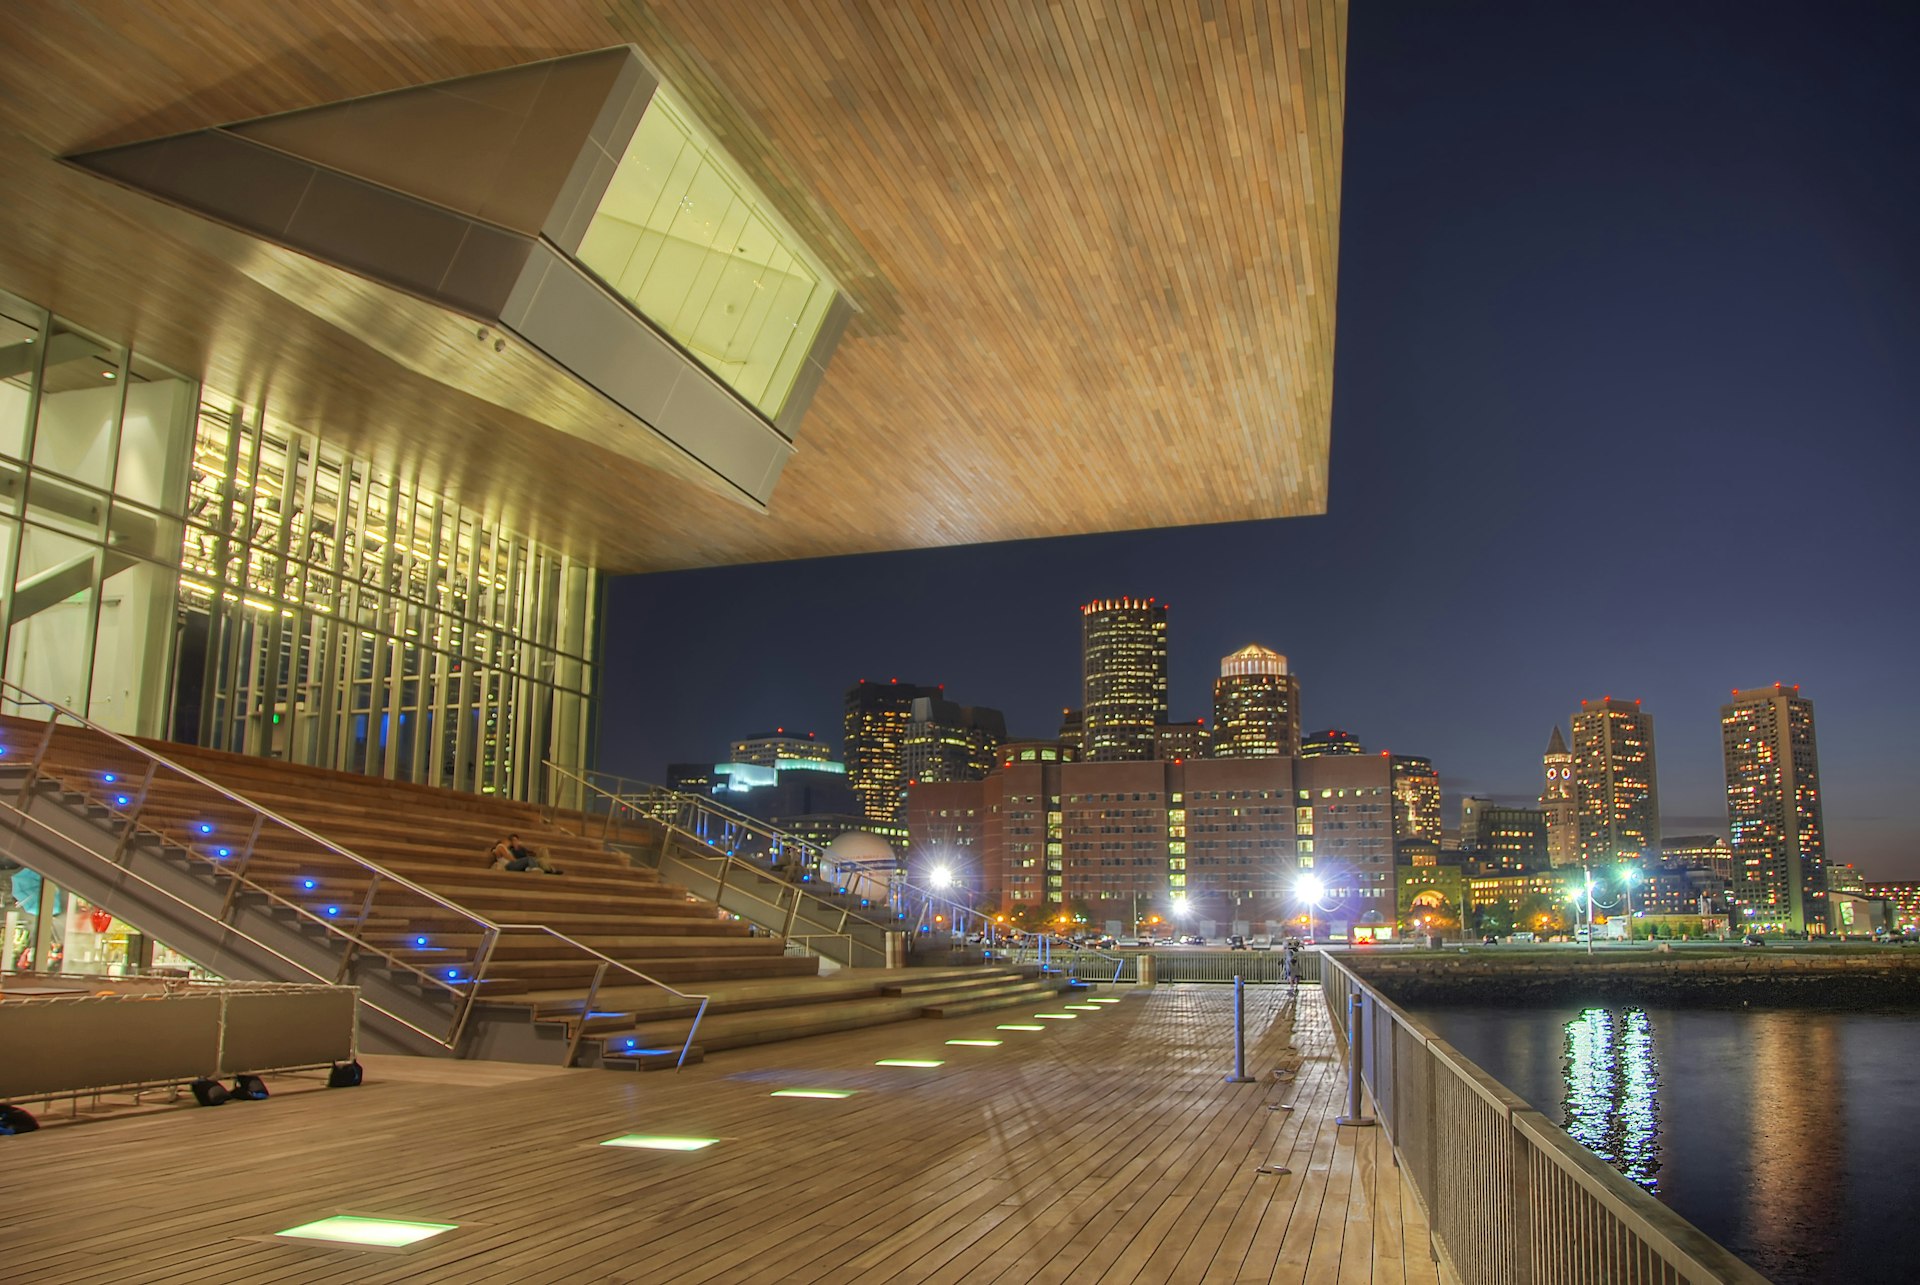 Boston's Institute of Contemporary Art set against the lights of the city